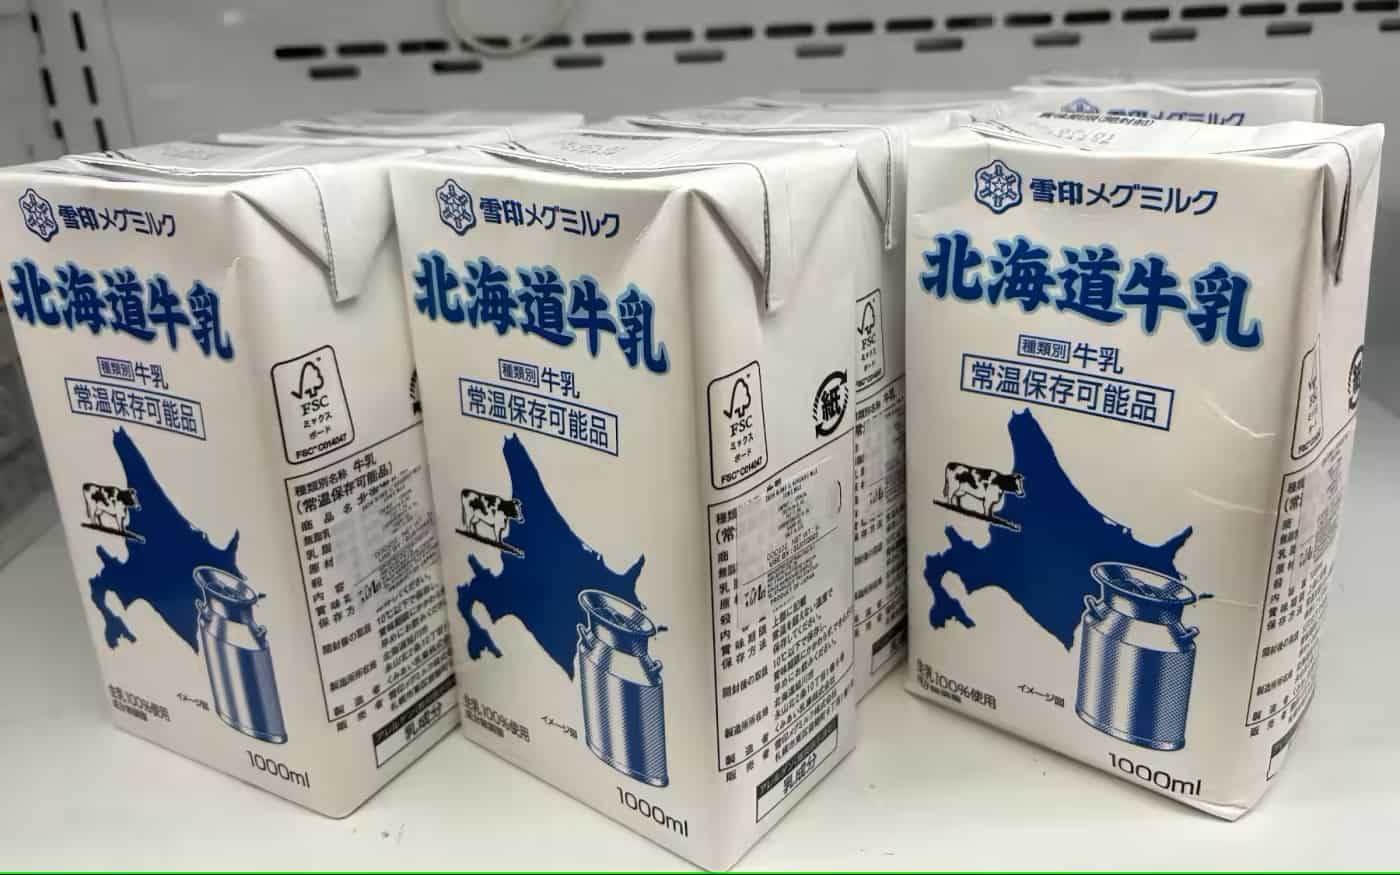 Japan dairy companies bet on Asia exports as demand slows at home